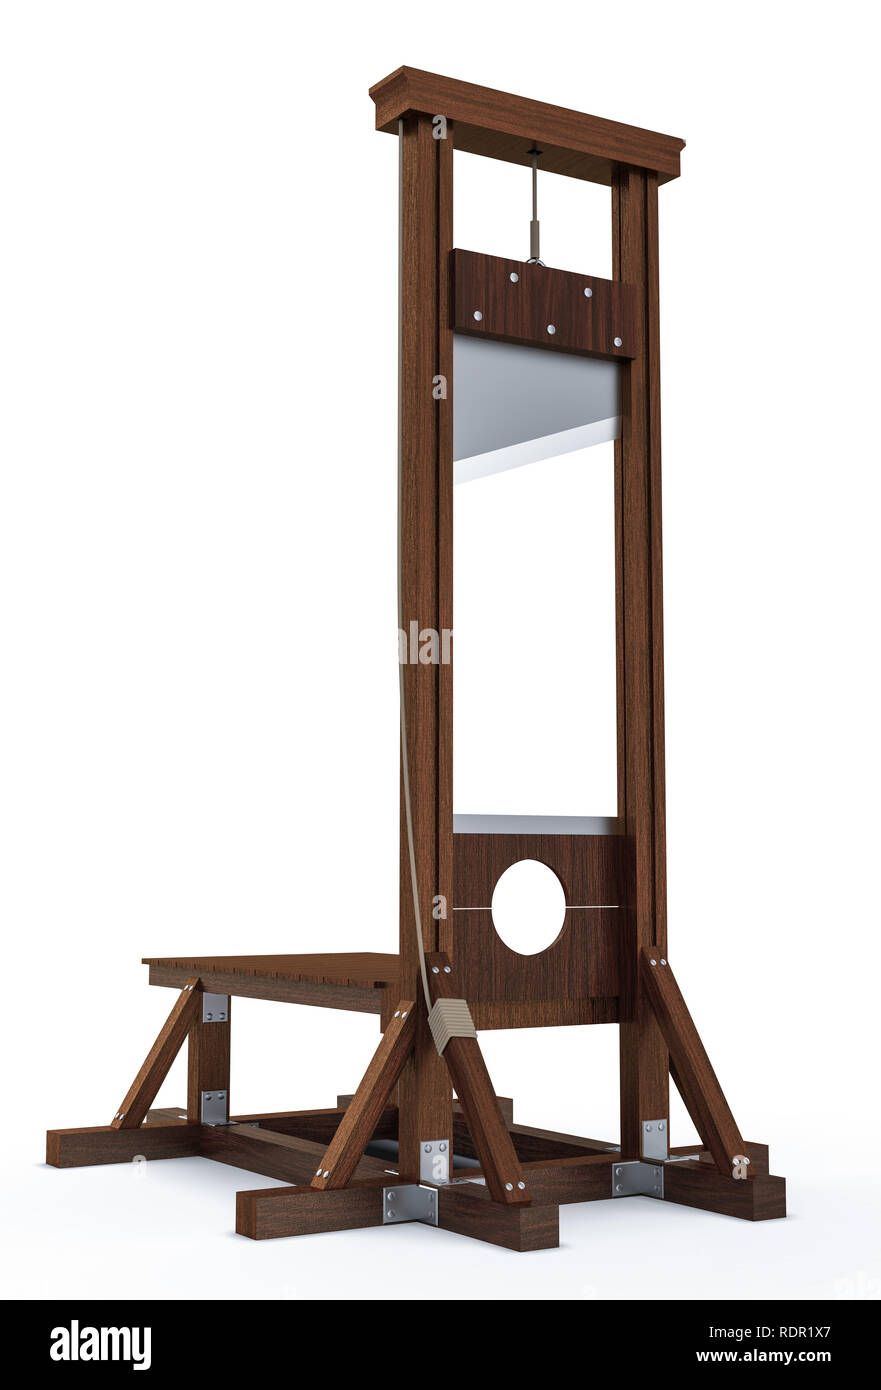 Guillotine High Resolution Stock Photography And Images Alamy